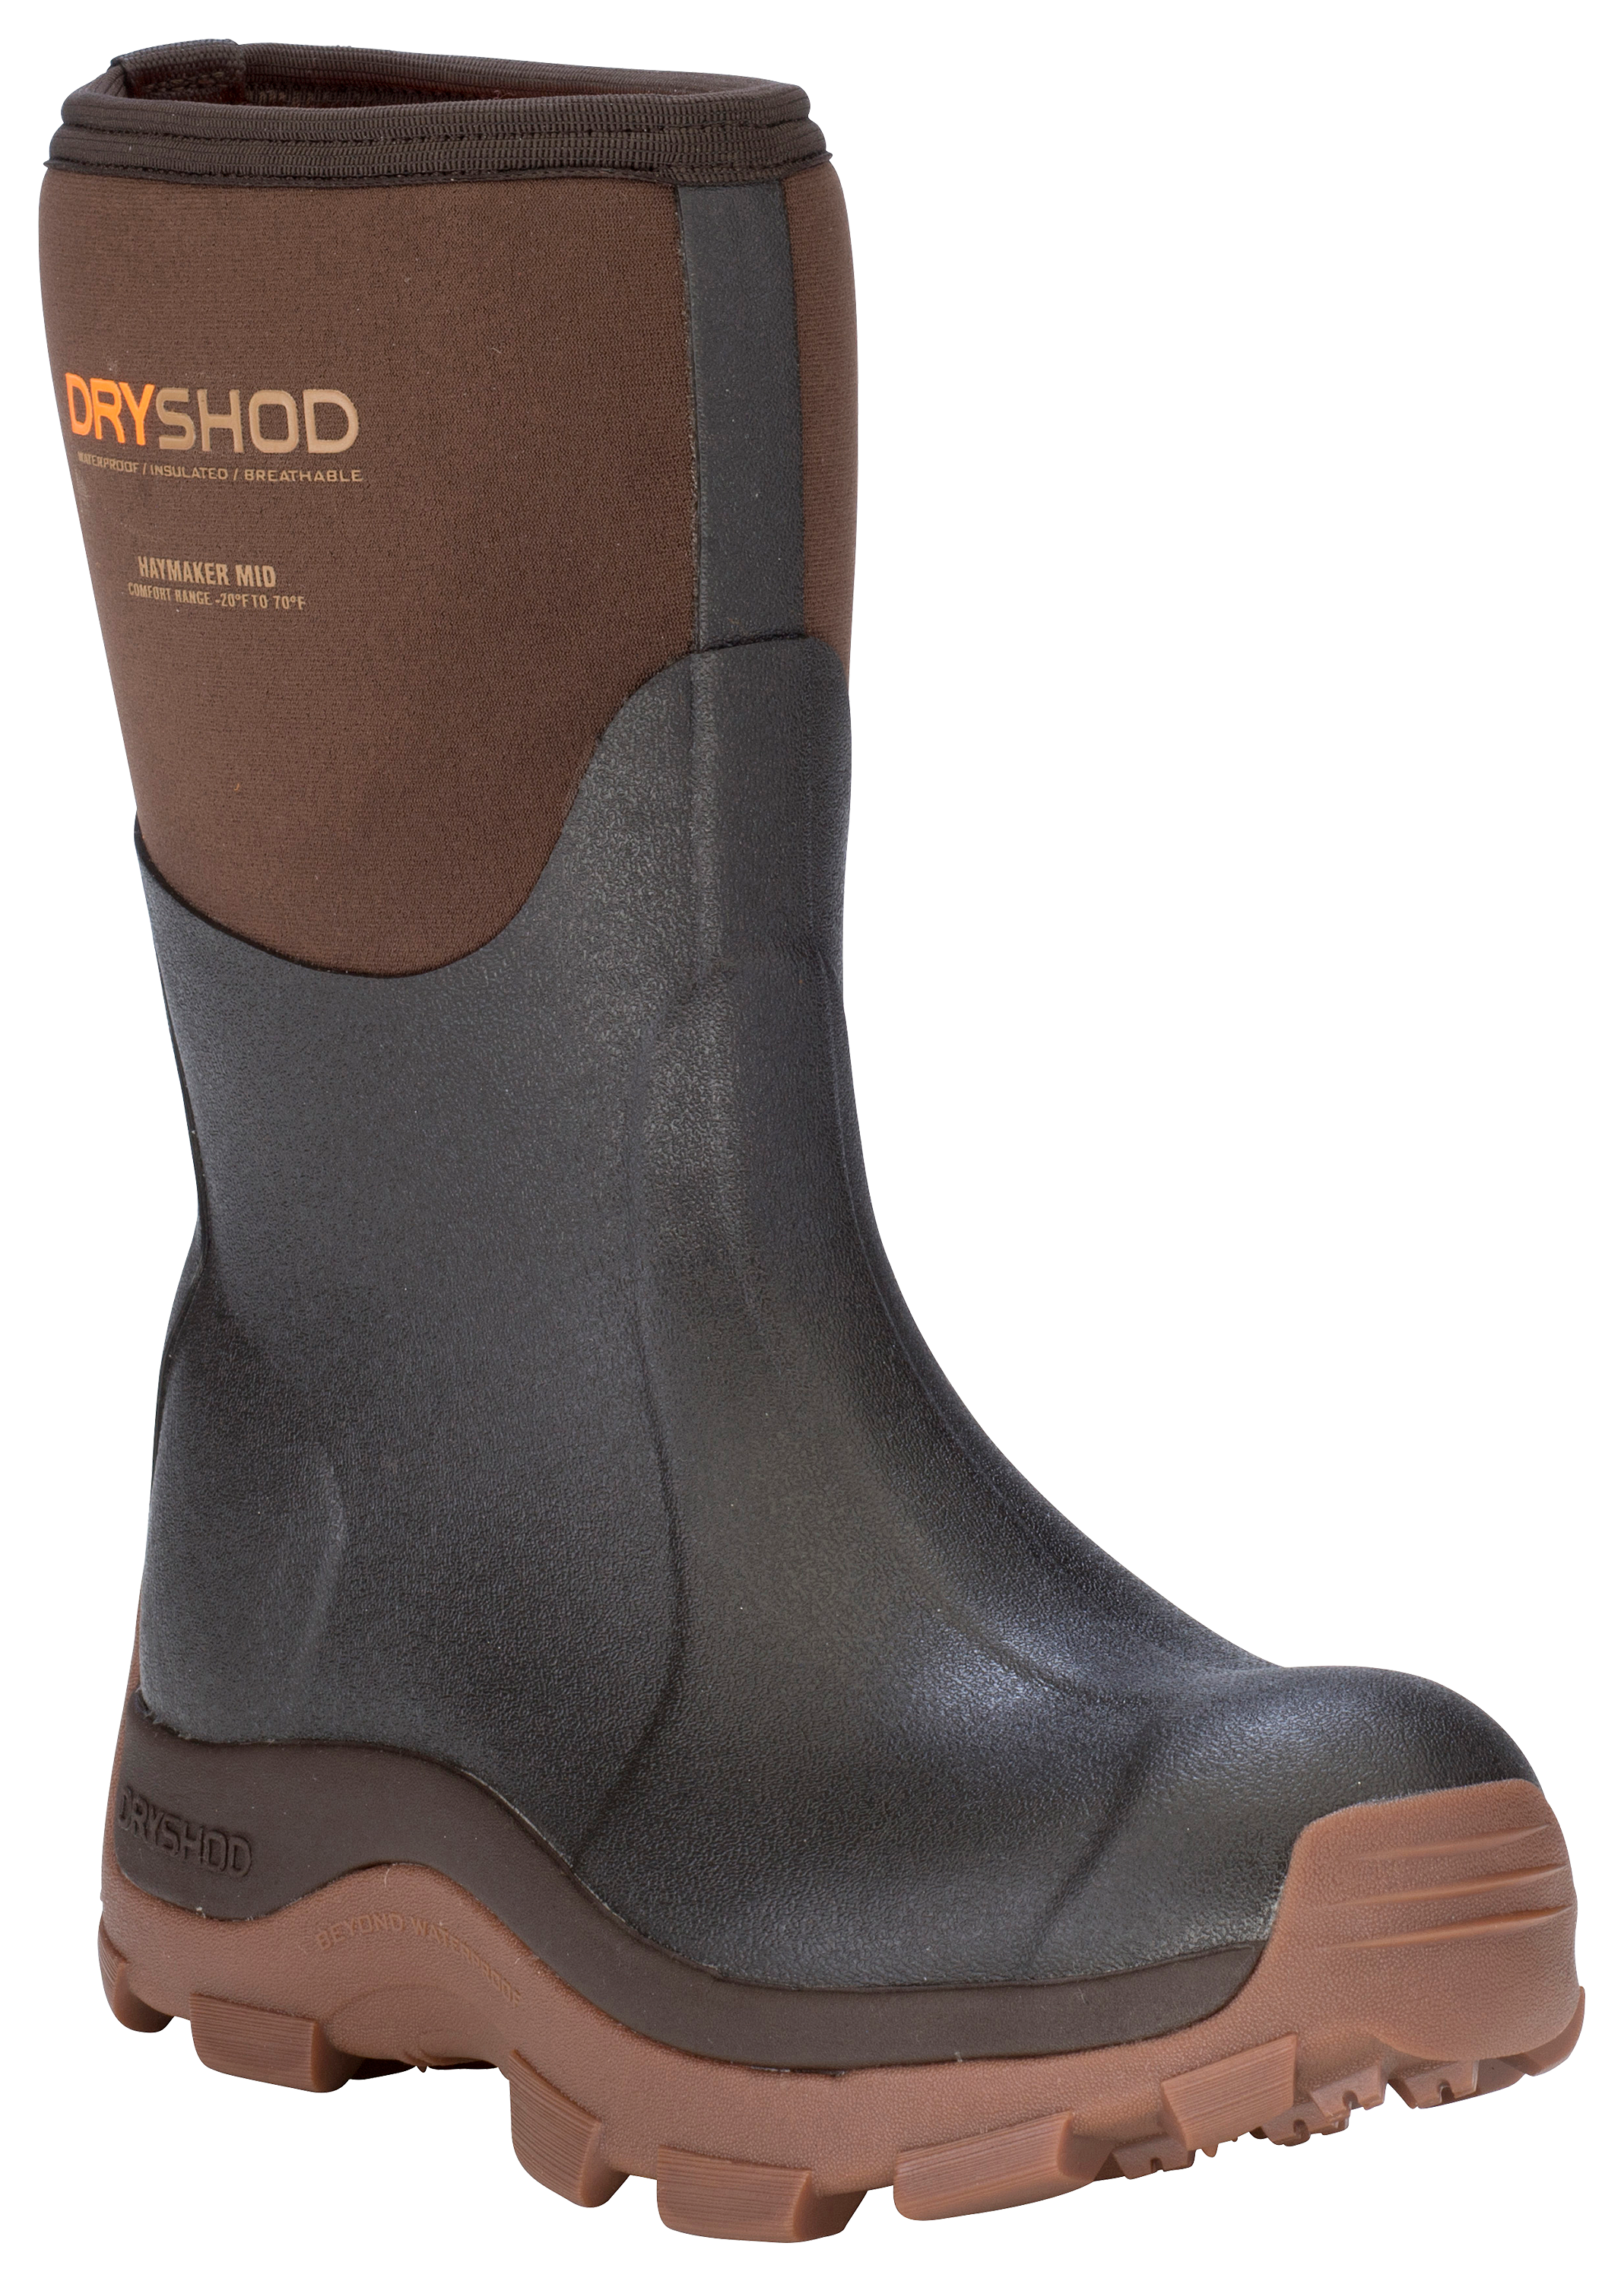 Dryshod Haymaker Mid Rubber Boots for Ladies